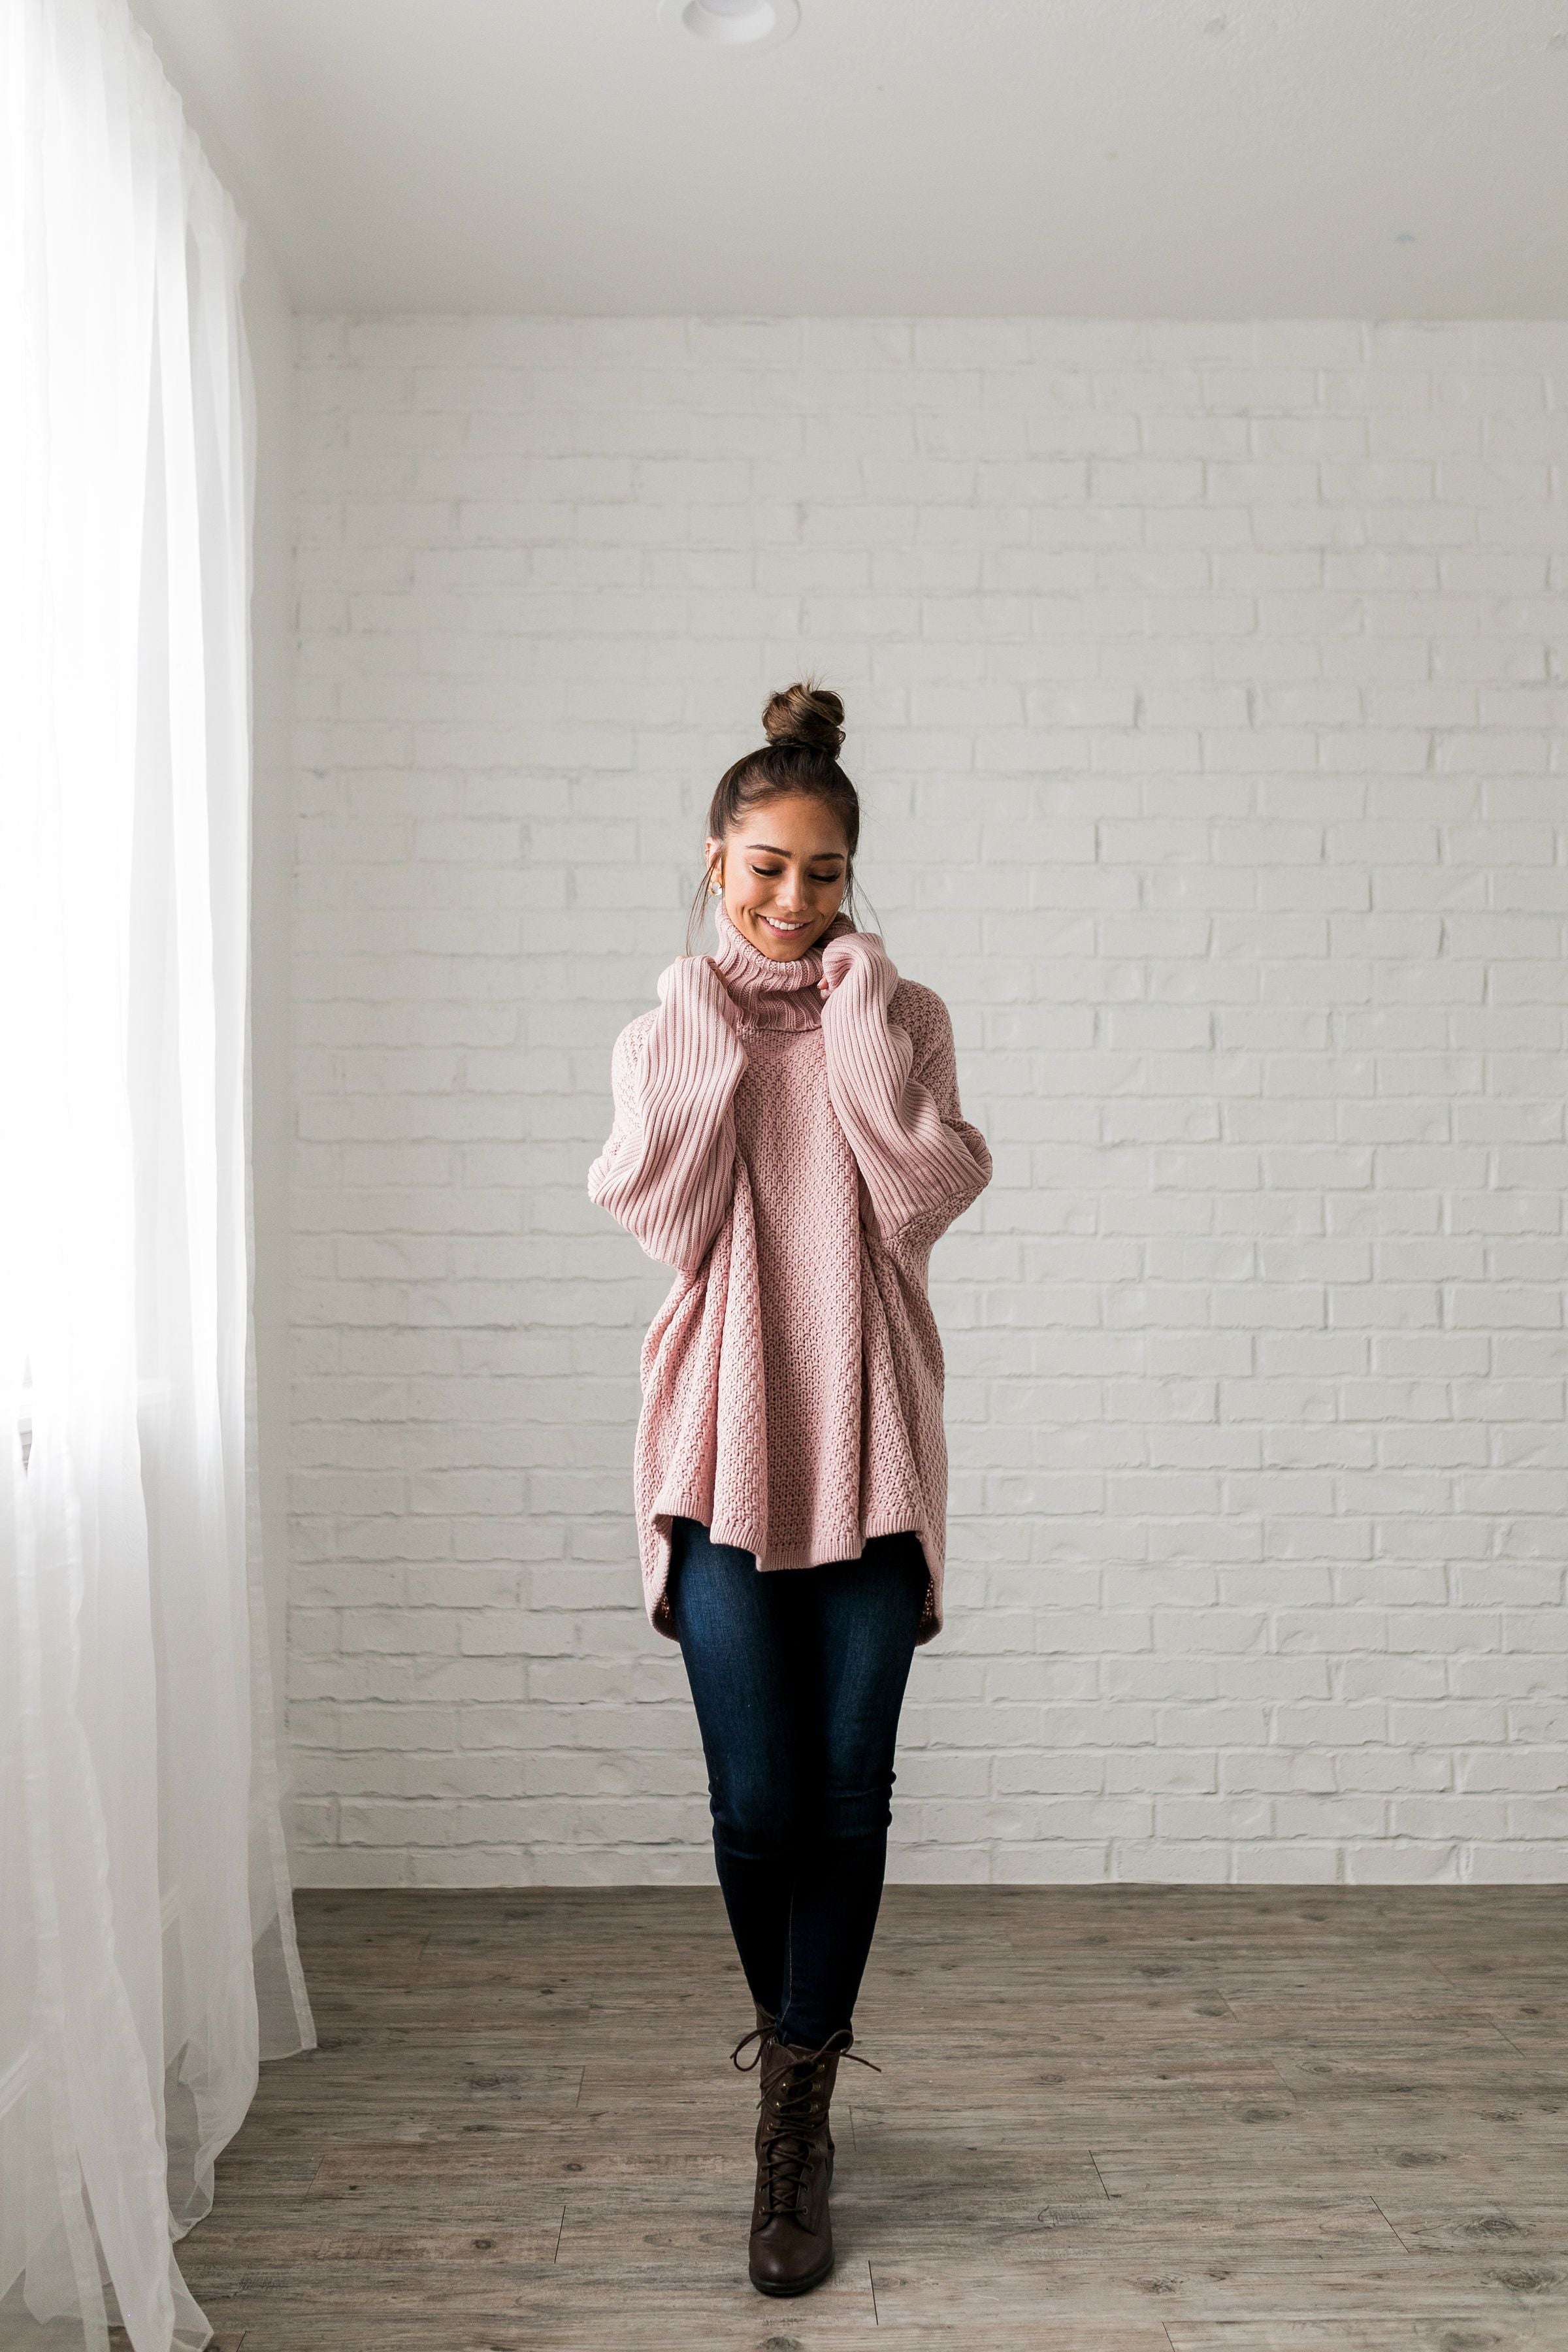 Chunky Cowl Neck Sweater - ALL SALES FINAL